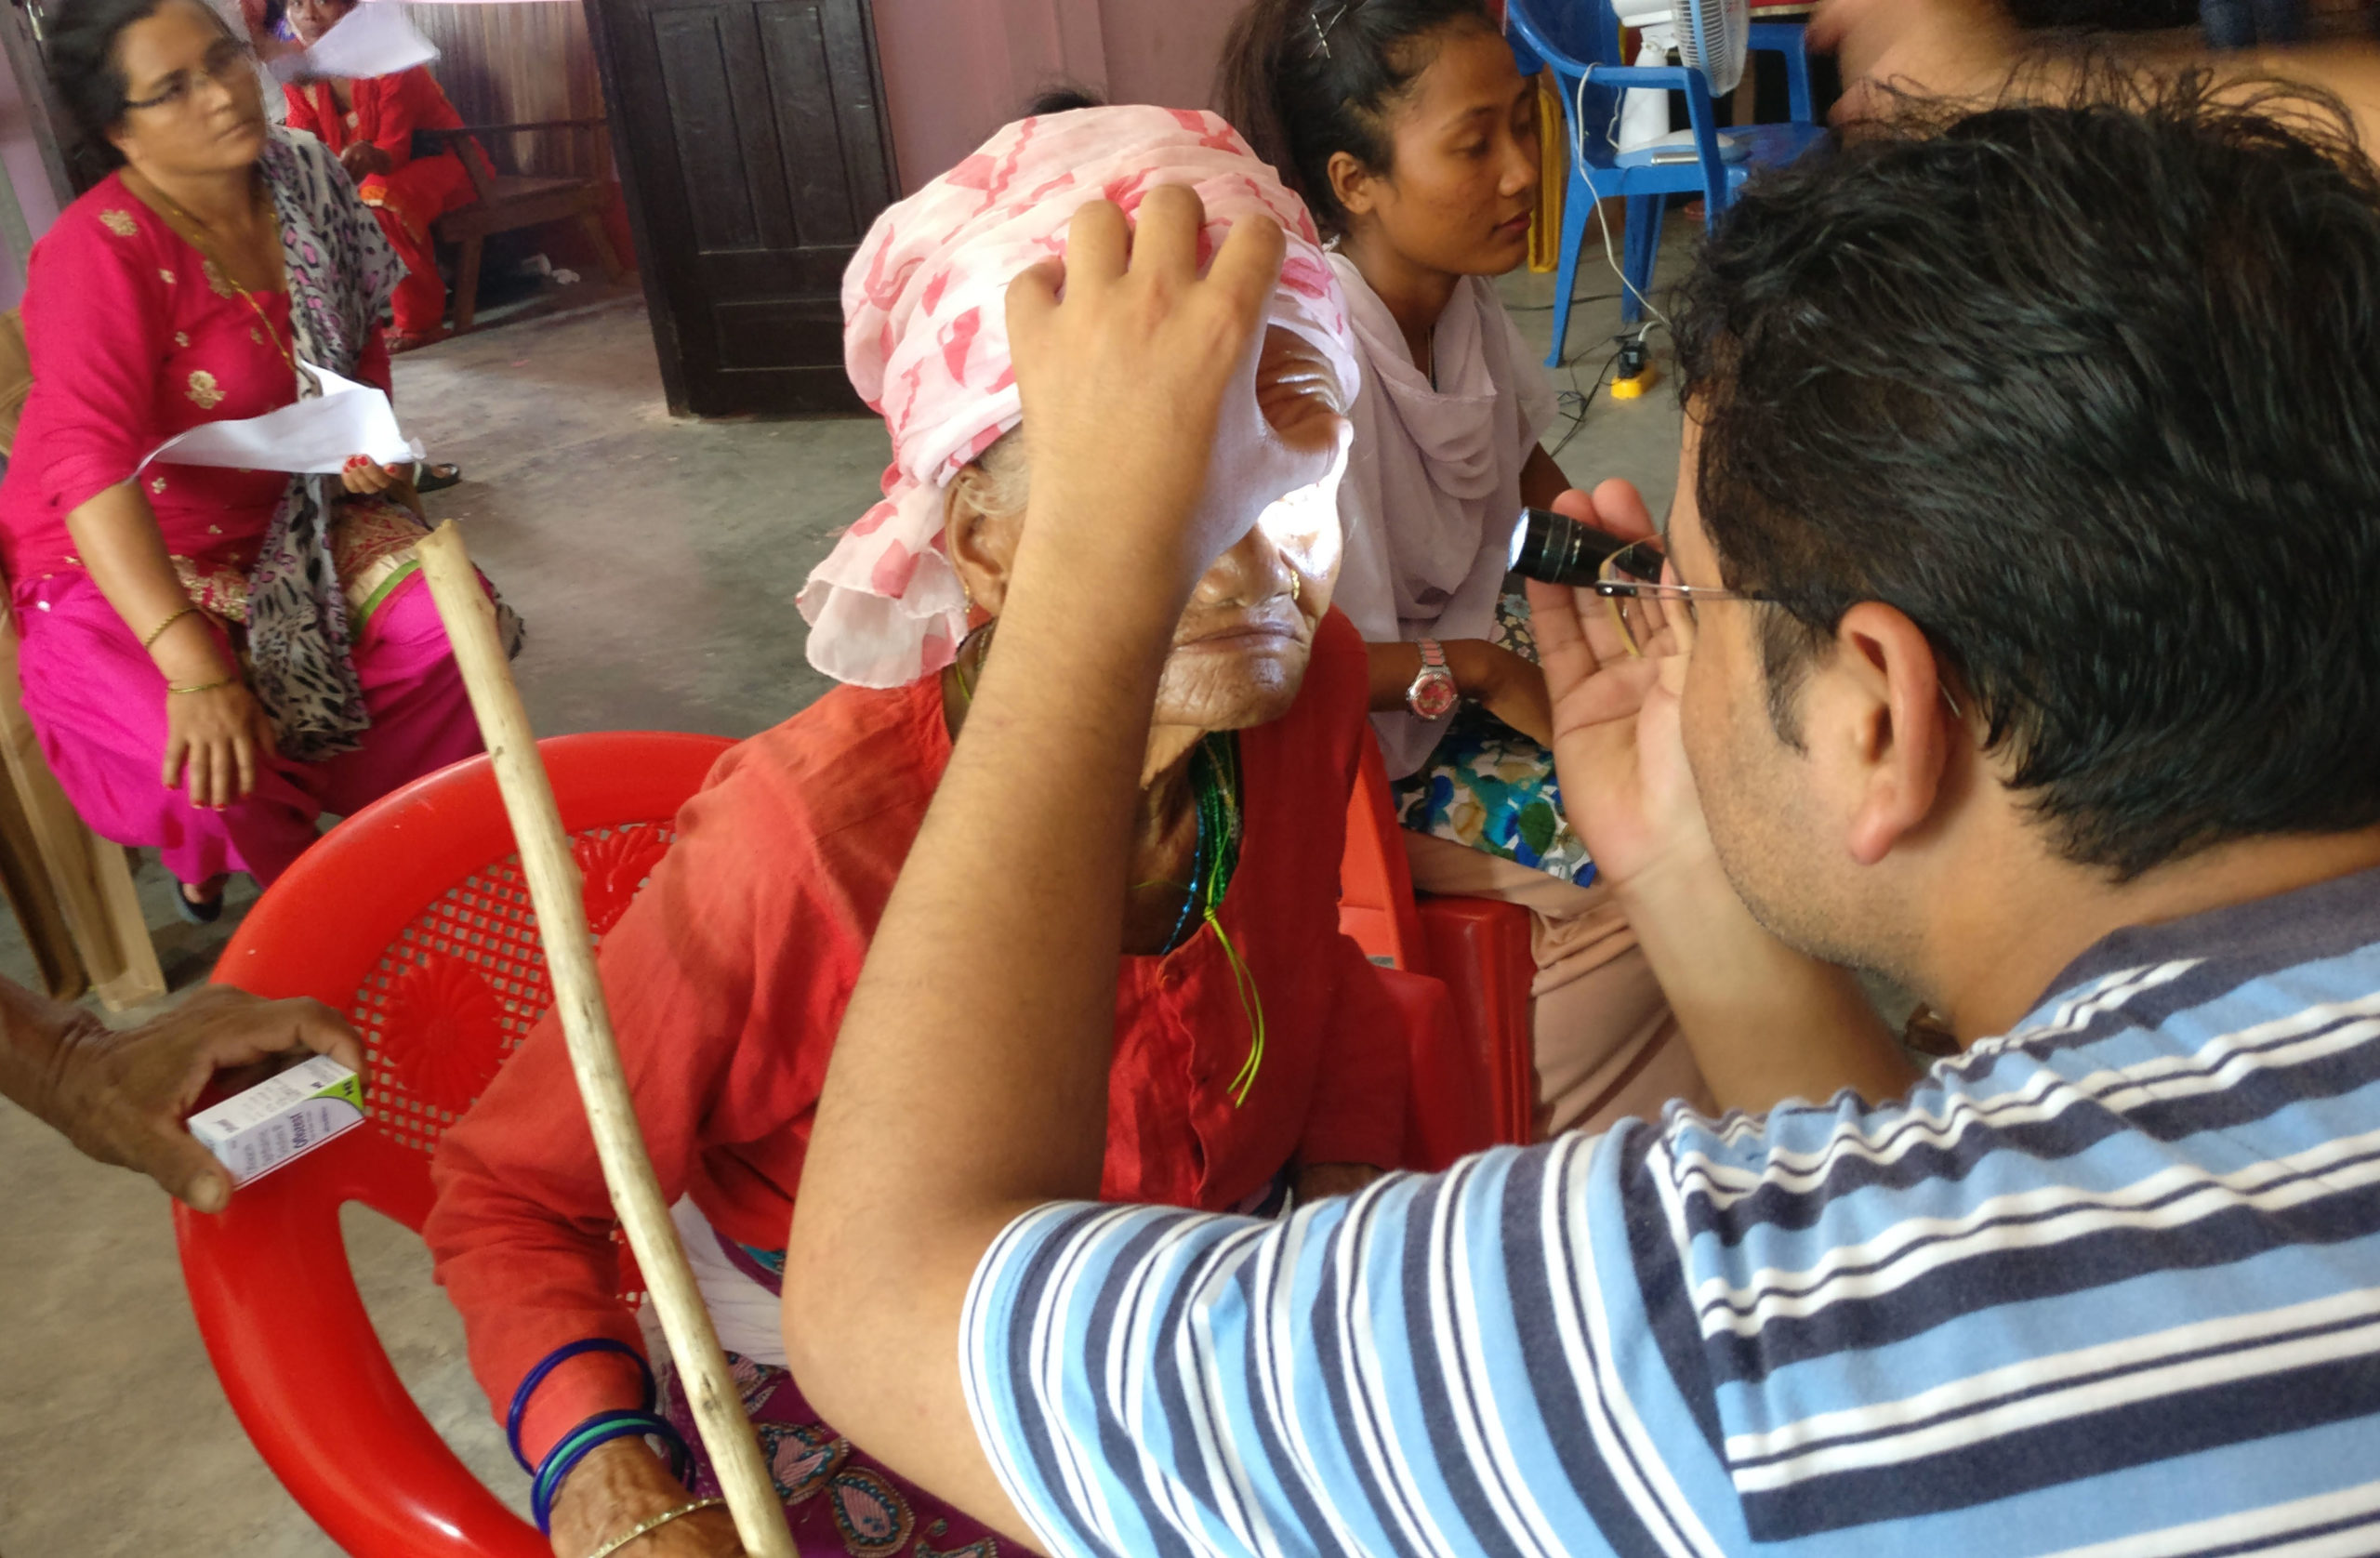 Allied eye care professionals are utilized in outreach eye camps in remote communities in Nepal. Photo Credit - Better Vision Foundation Nepal